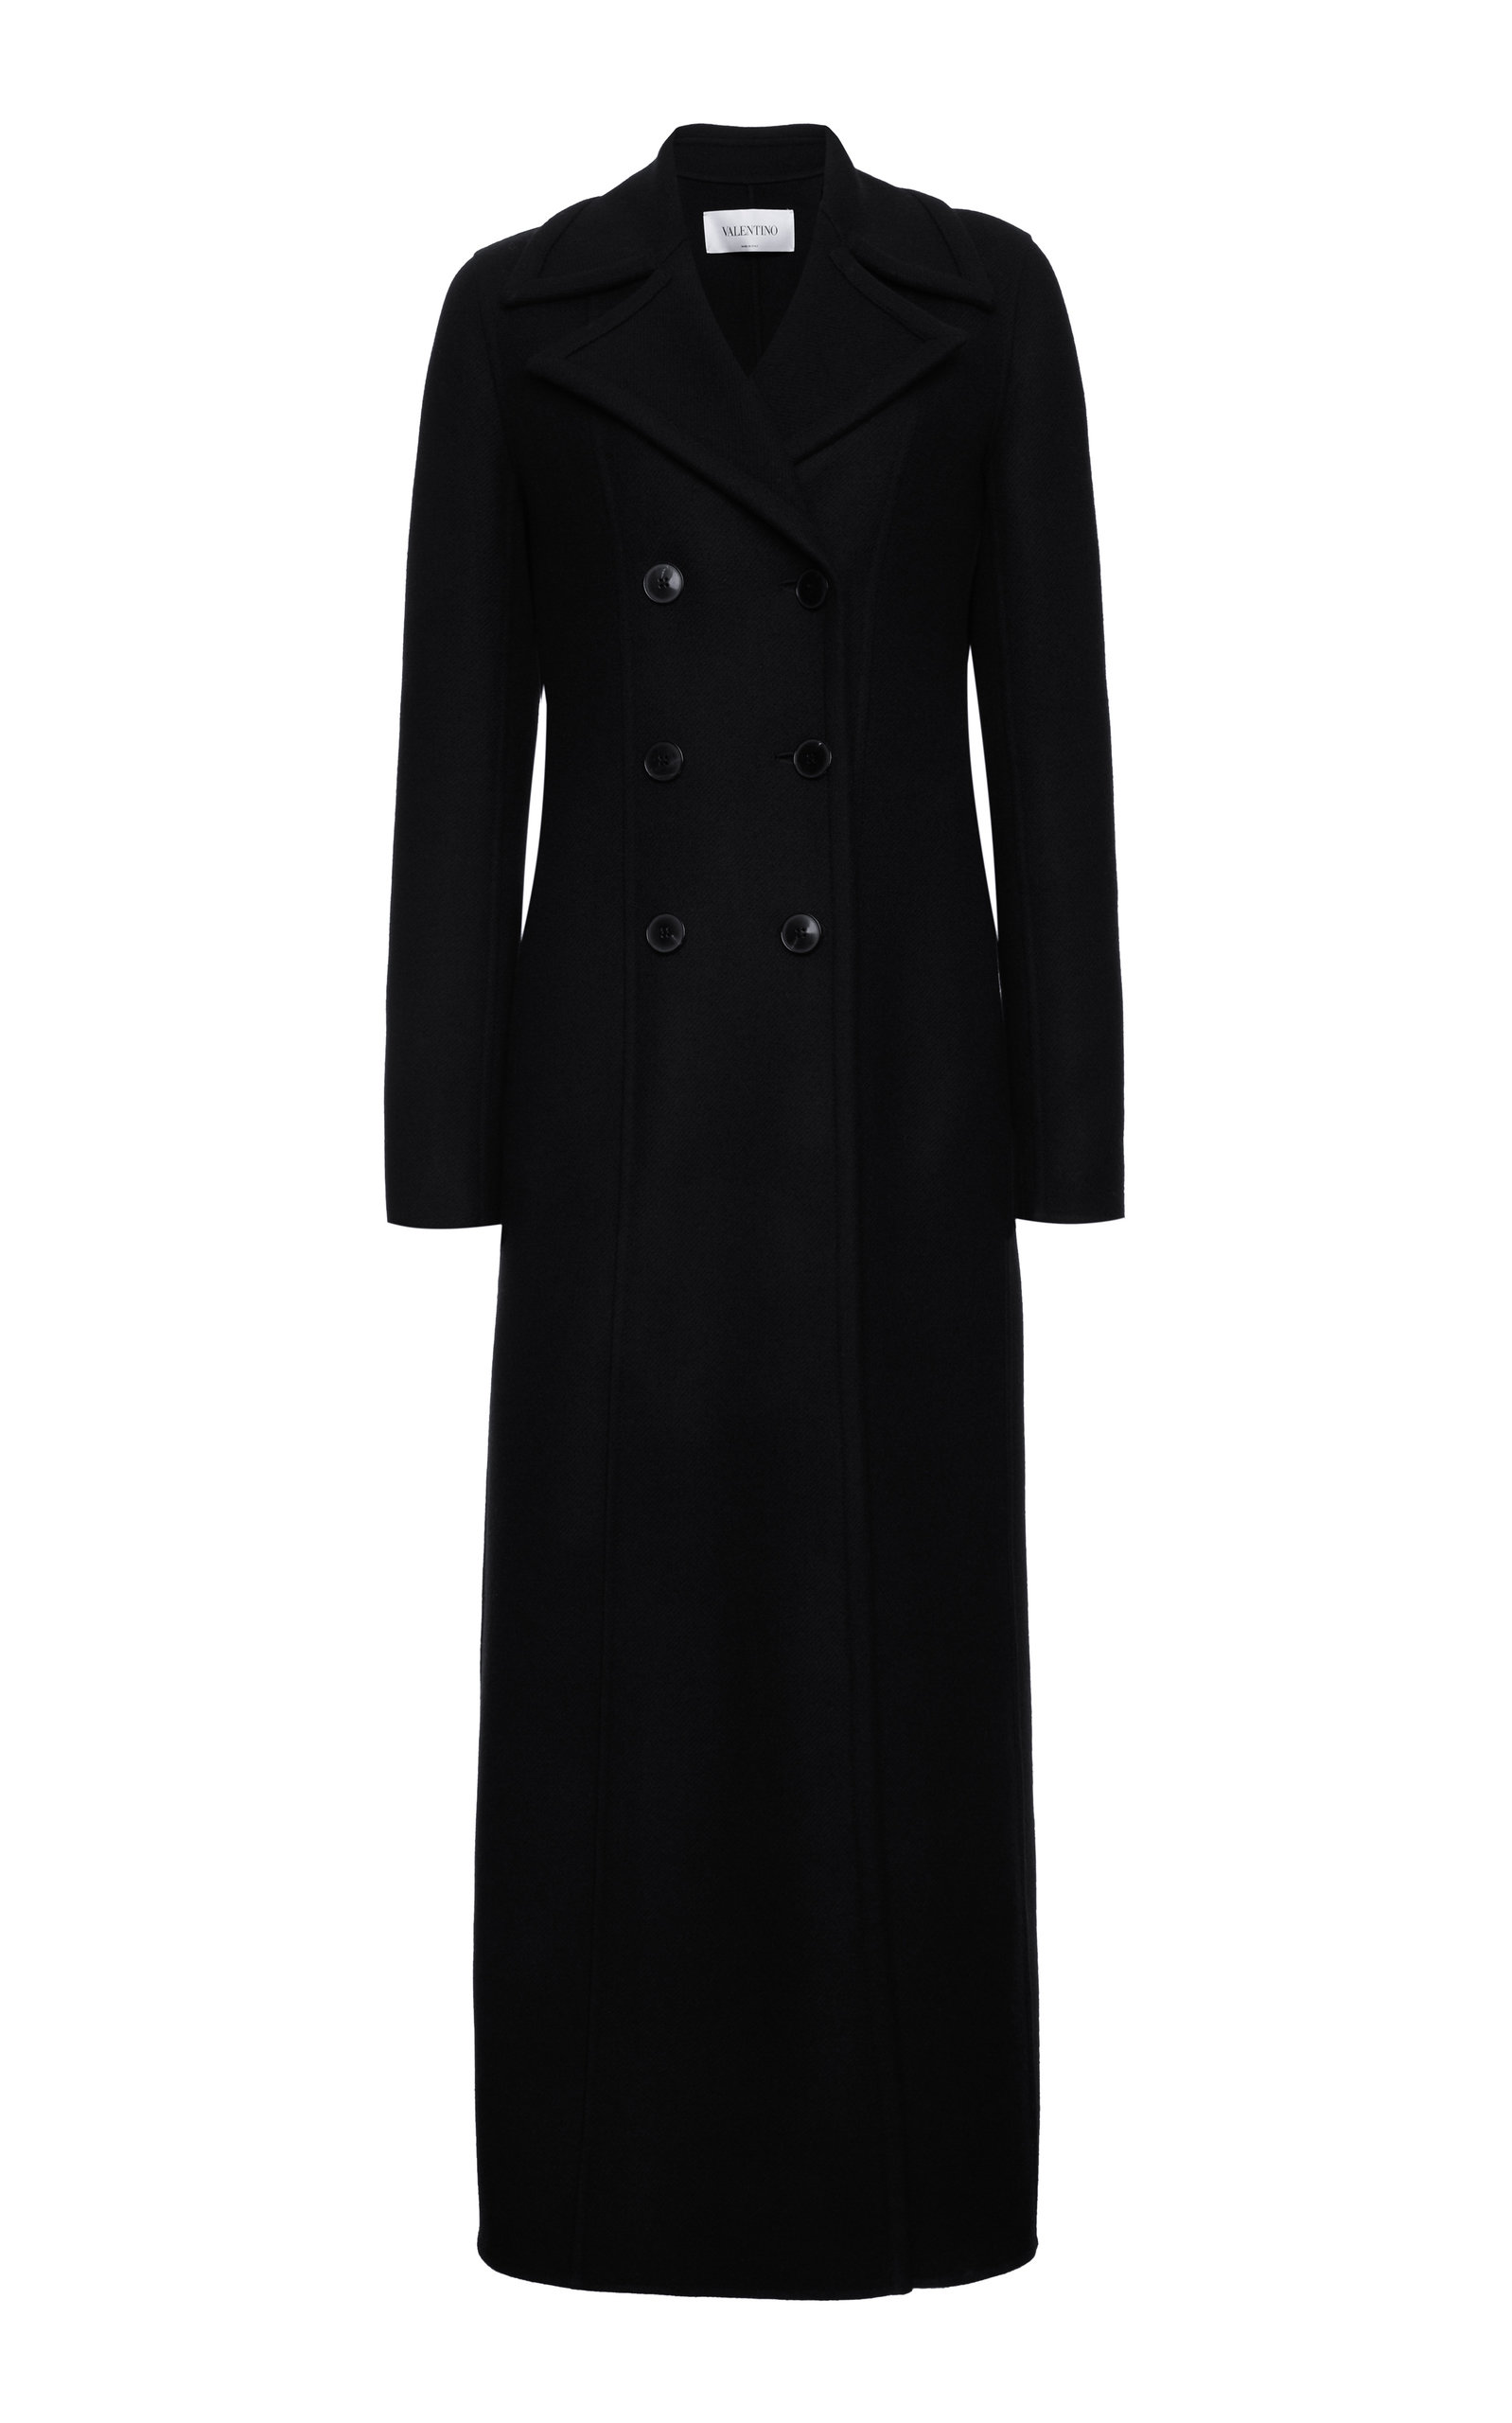 VALENTINO WOMEN'S DOUBLE-BREASTED WOOL-BLEND COAT